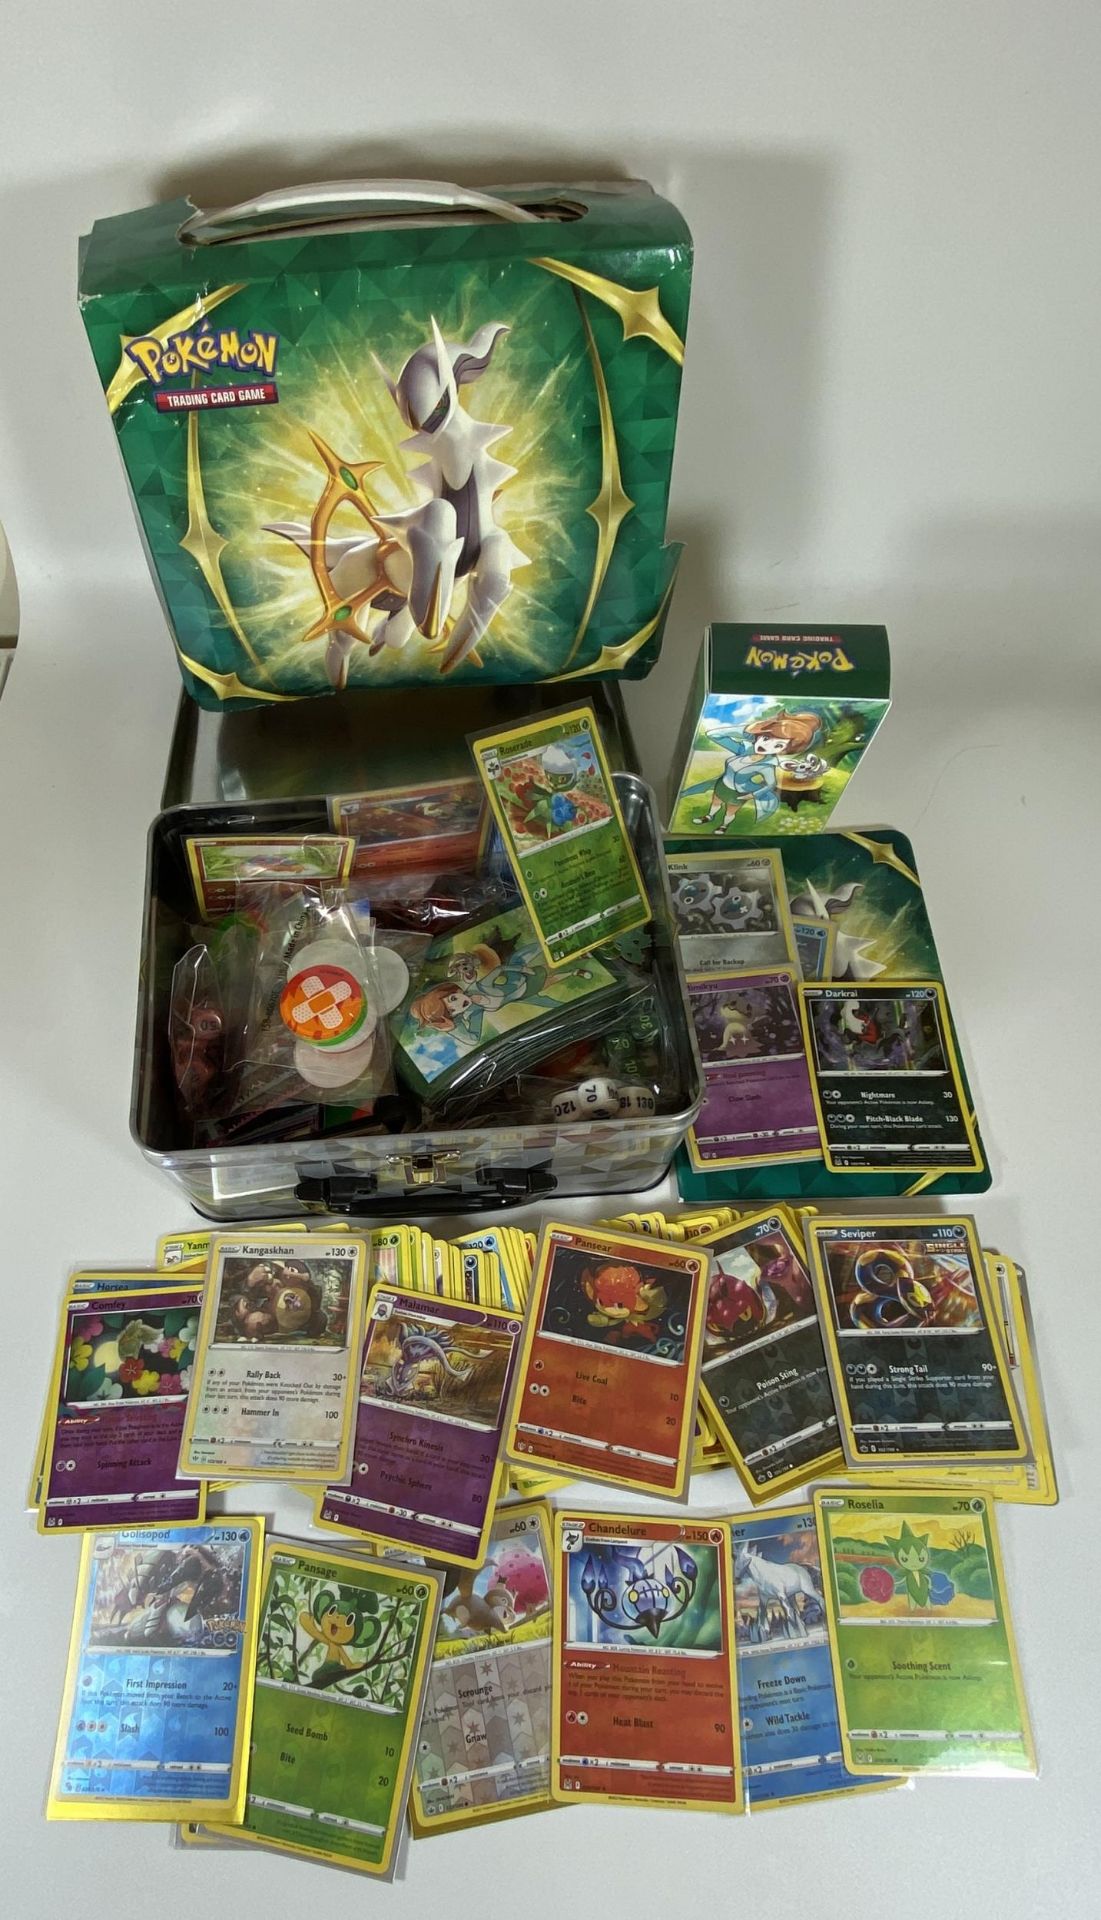 A POKEMON TIN TRAINER BOX FULL OF CARDS, GAME COUNTERS, RARES, HOLOS ETC